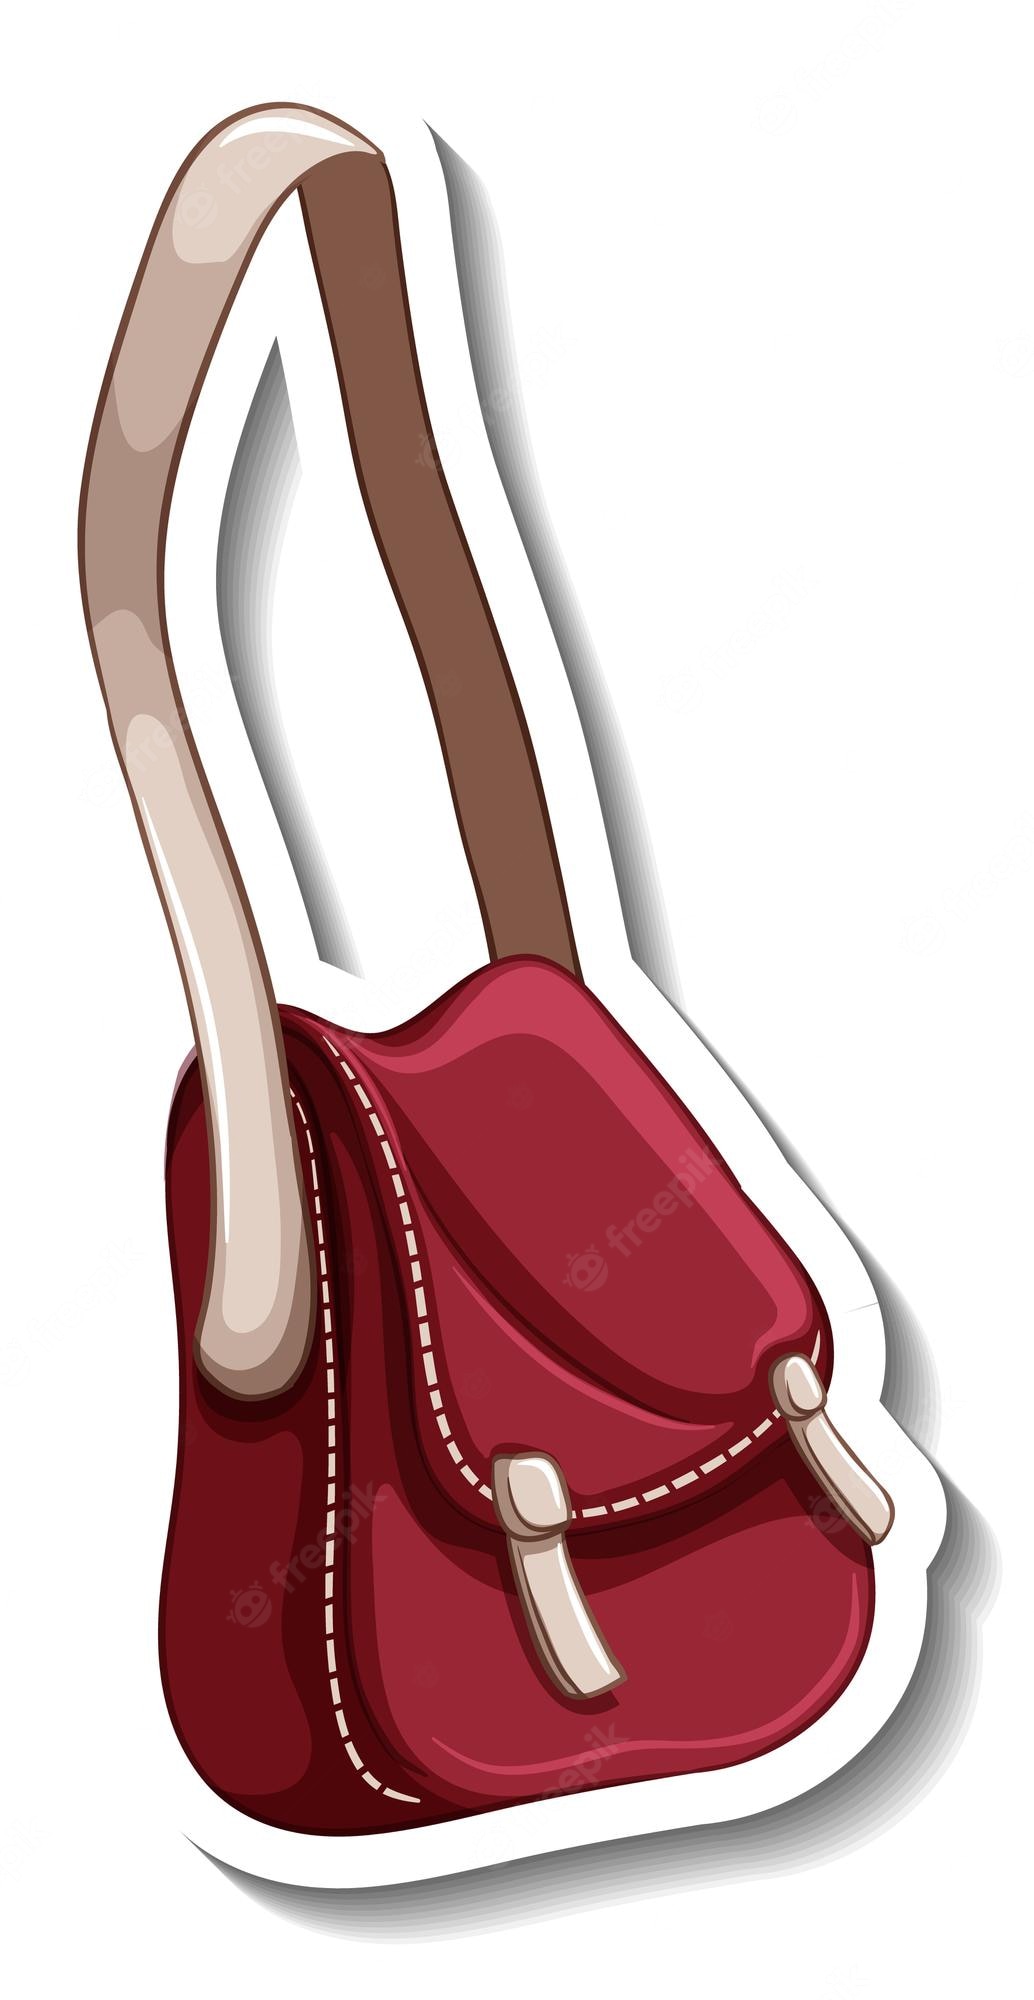 Lady With Shoulder Bag: Over 1,951 Royalty-Free Licensable Stock  Illustrations & Drawings | Shutterstock